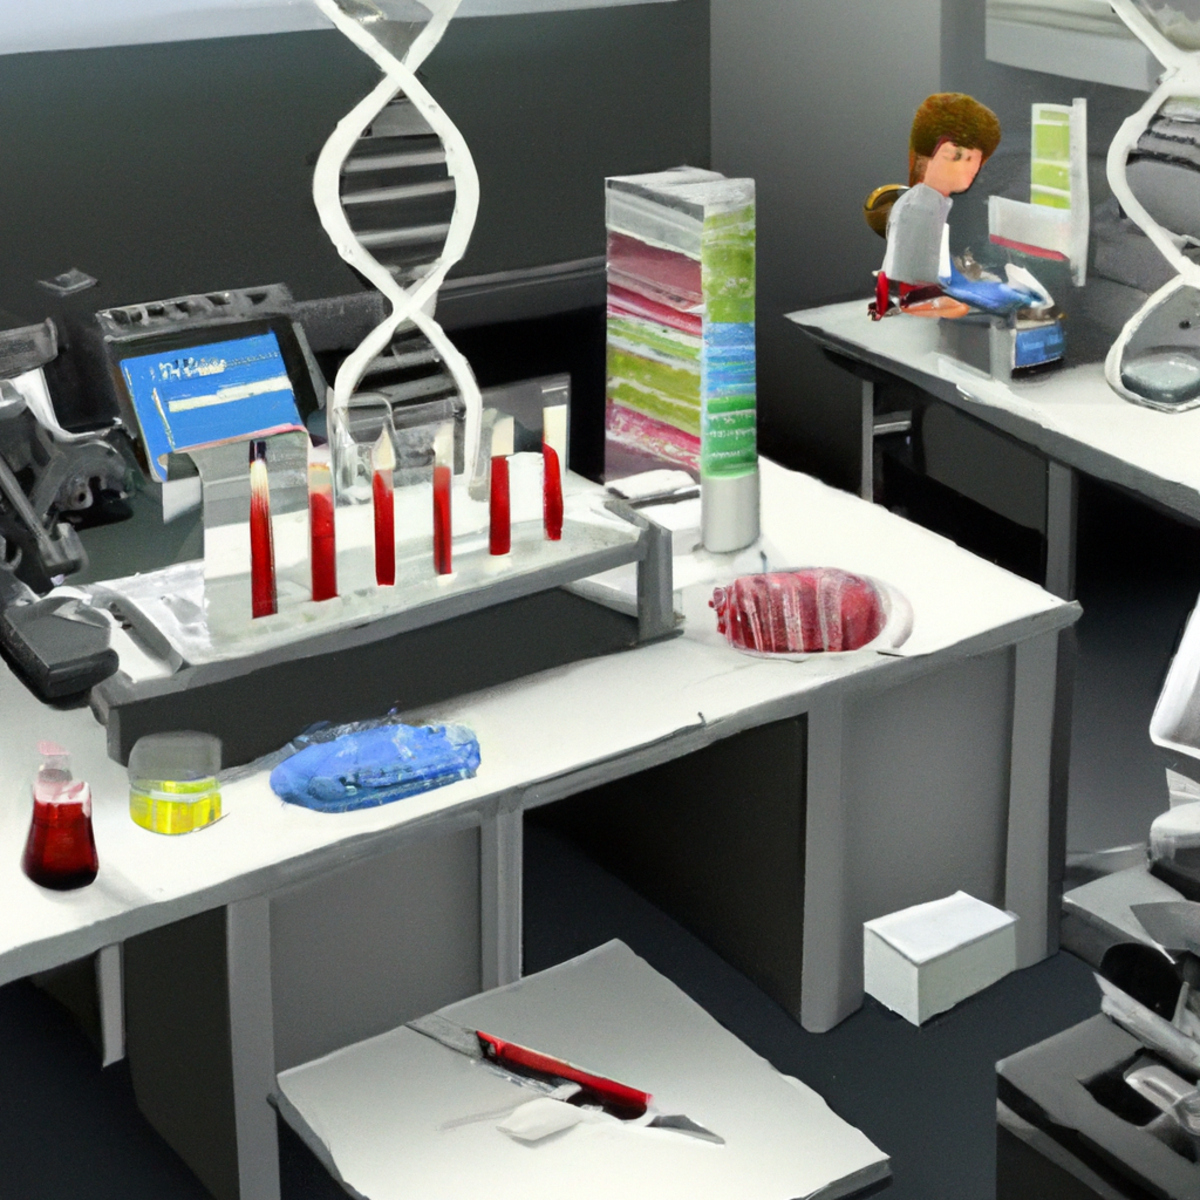 DNA sequencing machine analyzing genetic information in a well-equipped laboratory, highlighting the importance of technology in detecting Pallister-Killian Syndrome.